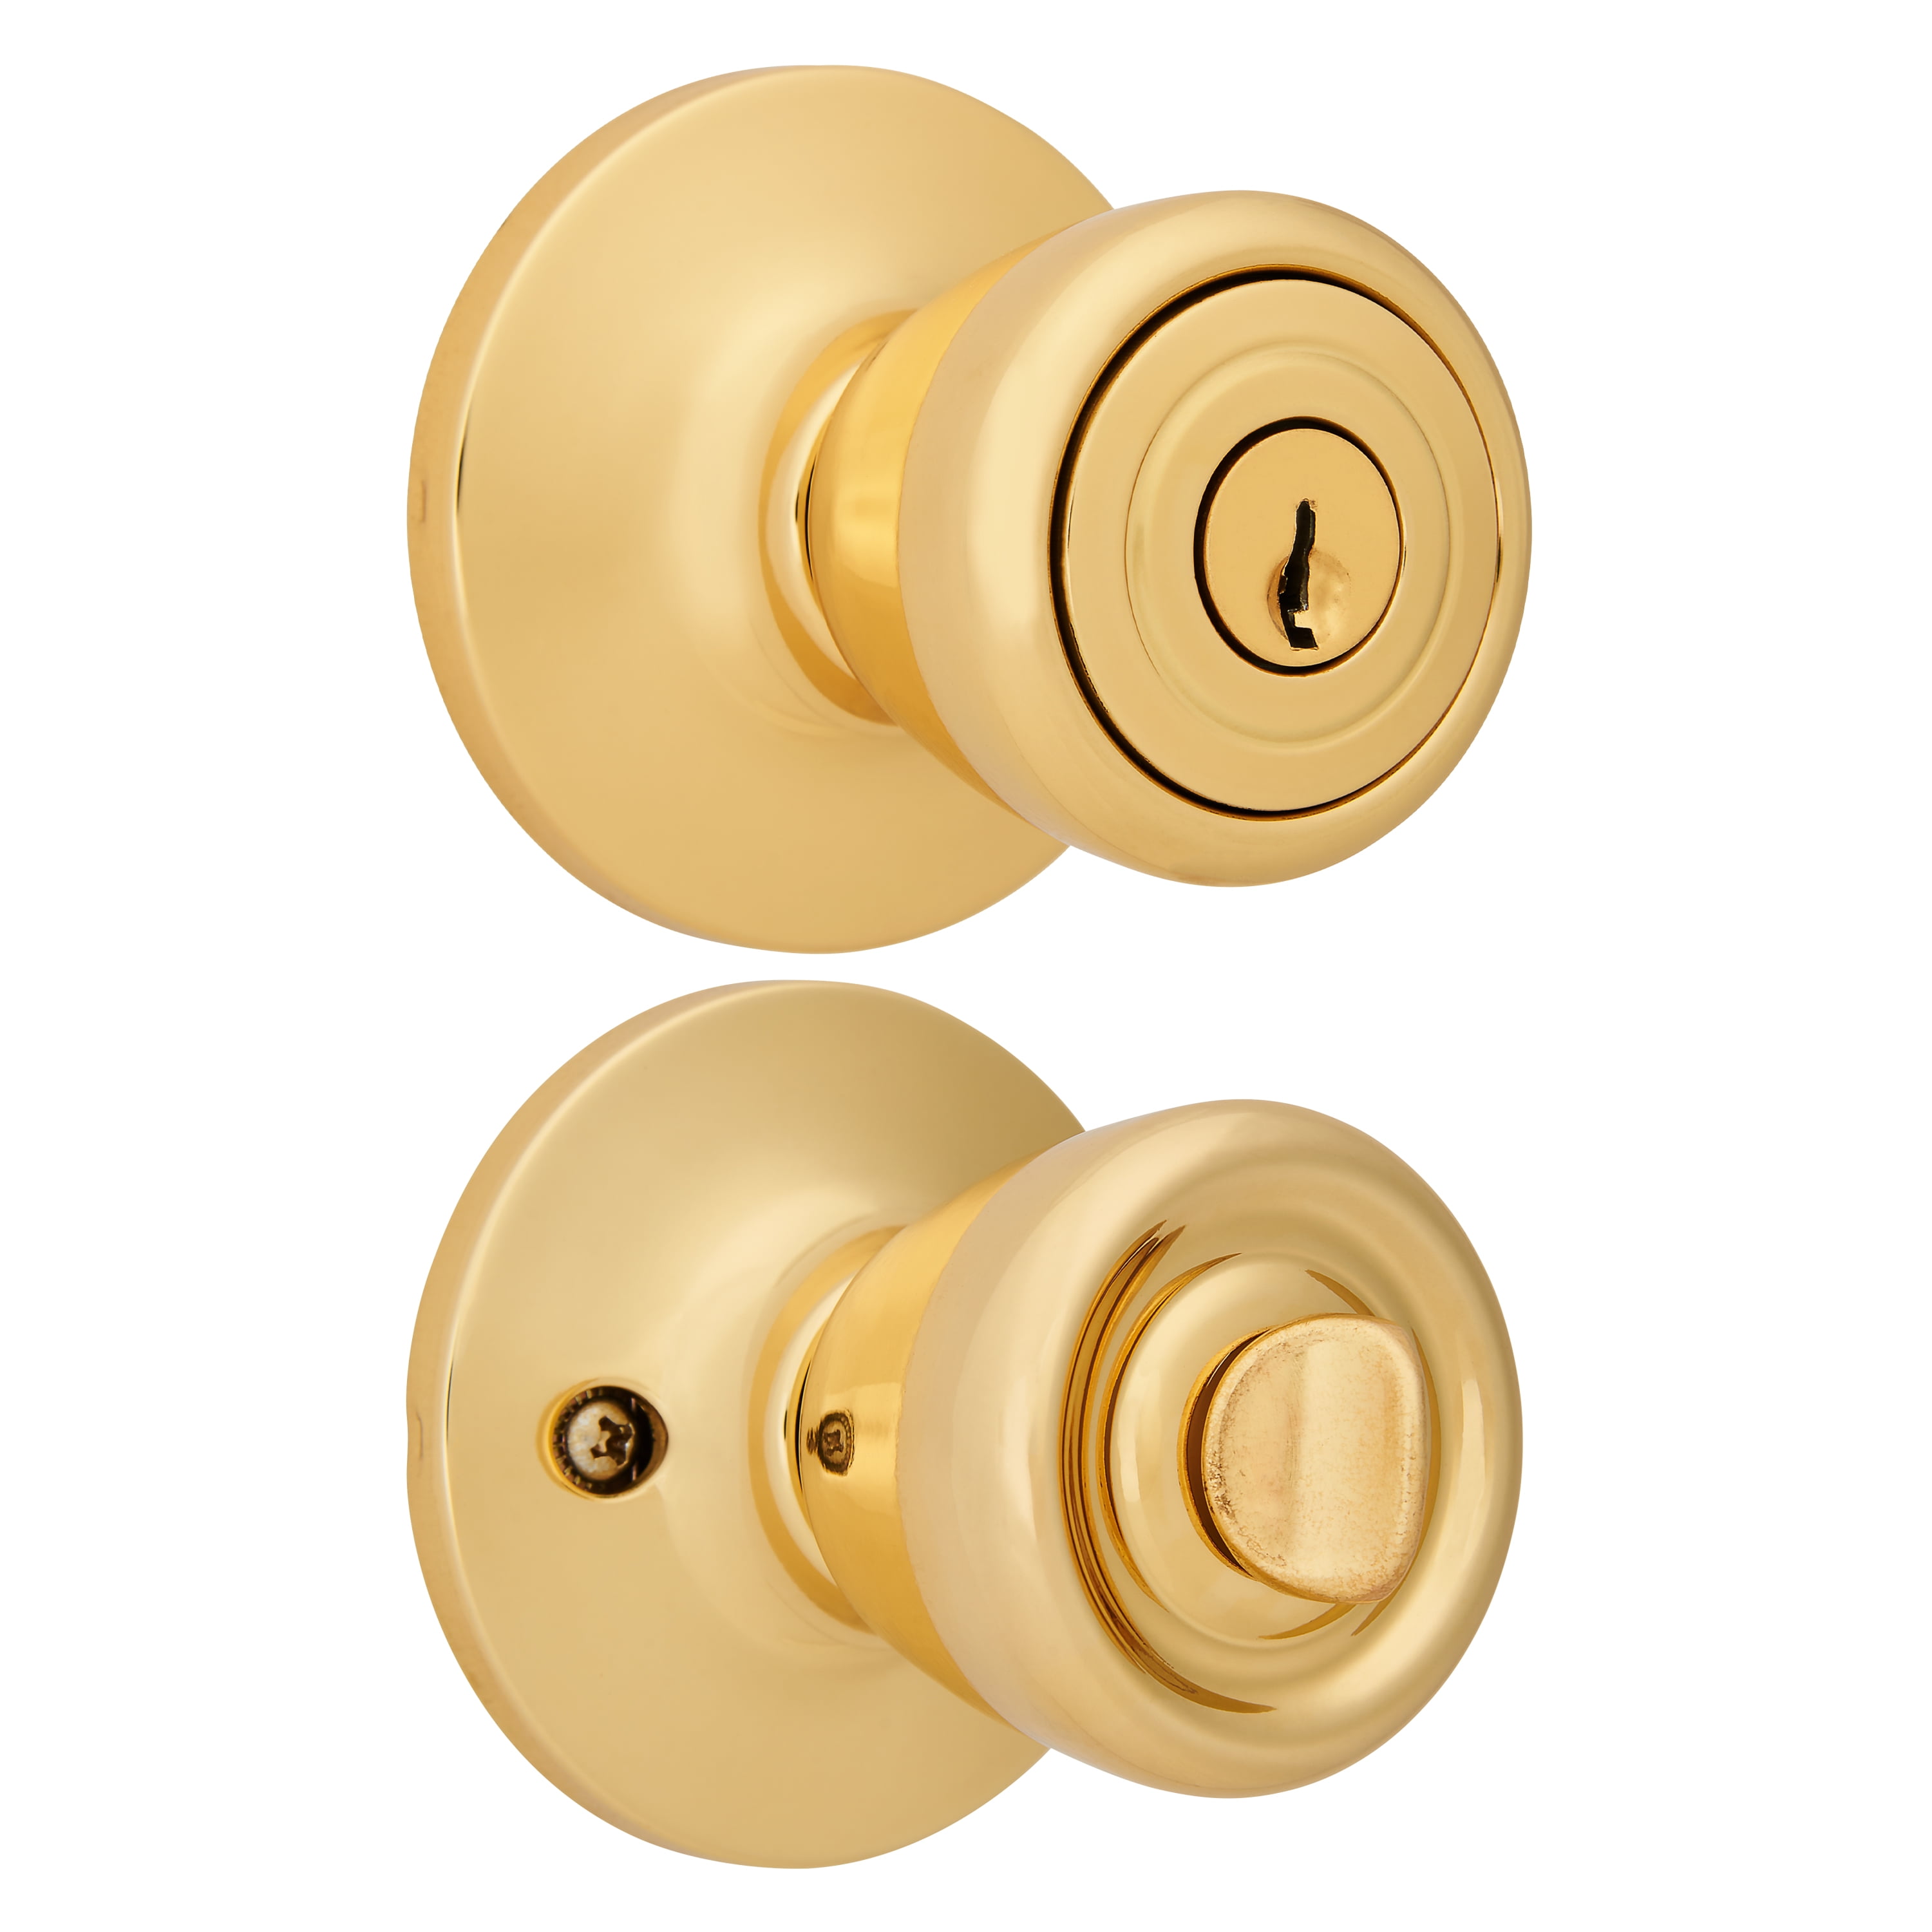 Kwikset 94002-374 Polo Keyed Entry Knob in Polished Brass 